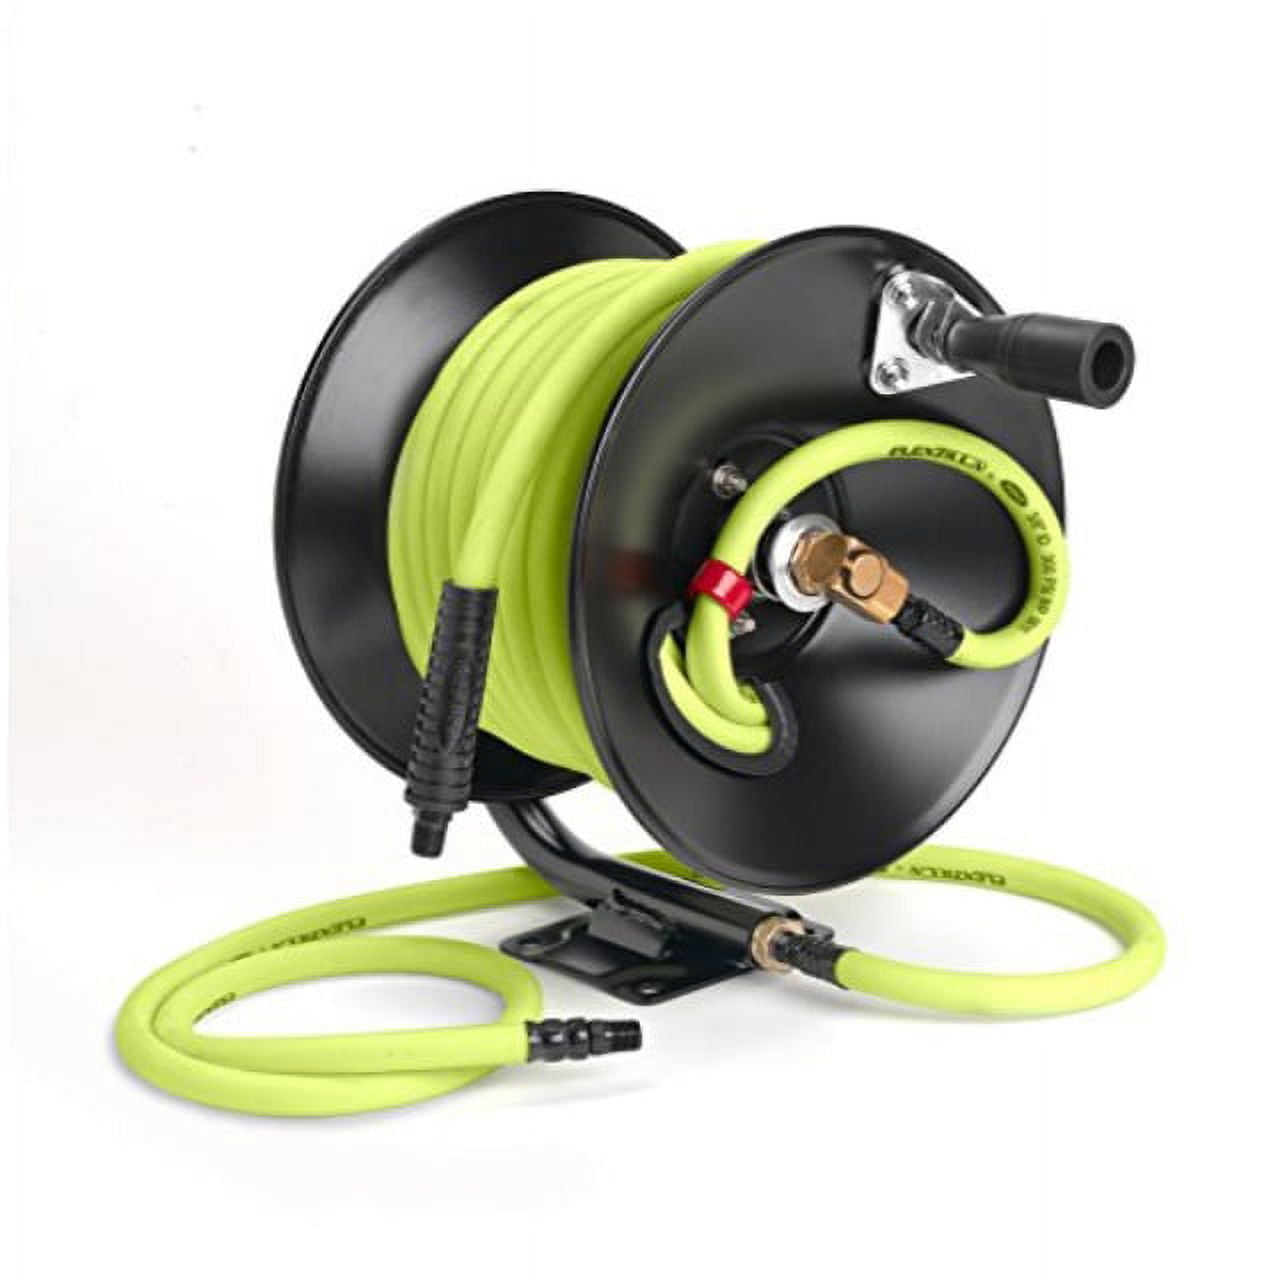 Rapidair 1/2 x 100' Dual Arm Steel Hose Reel 1/2 Inlet and Outlet R-05100